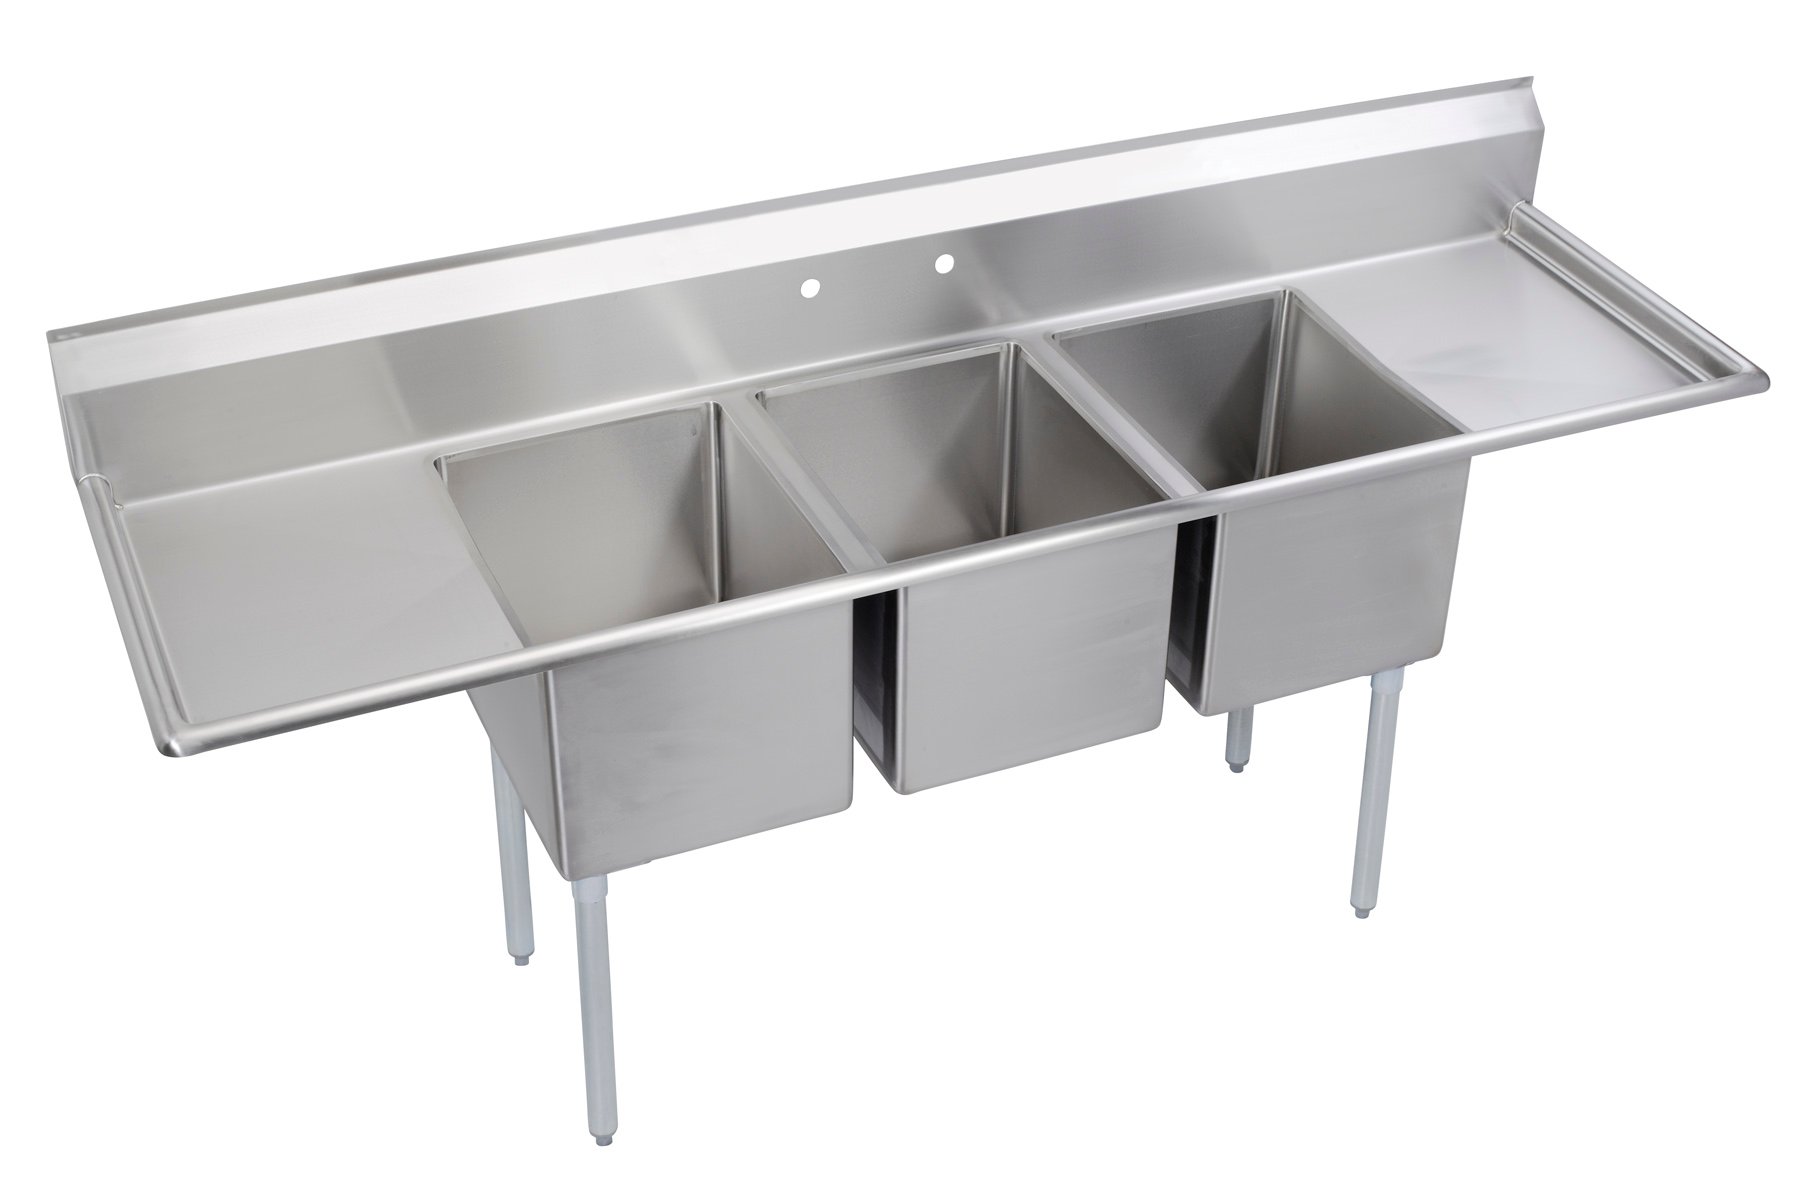 3 compartment residential kitchen sink